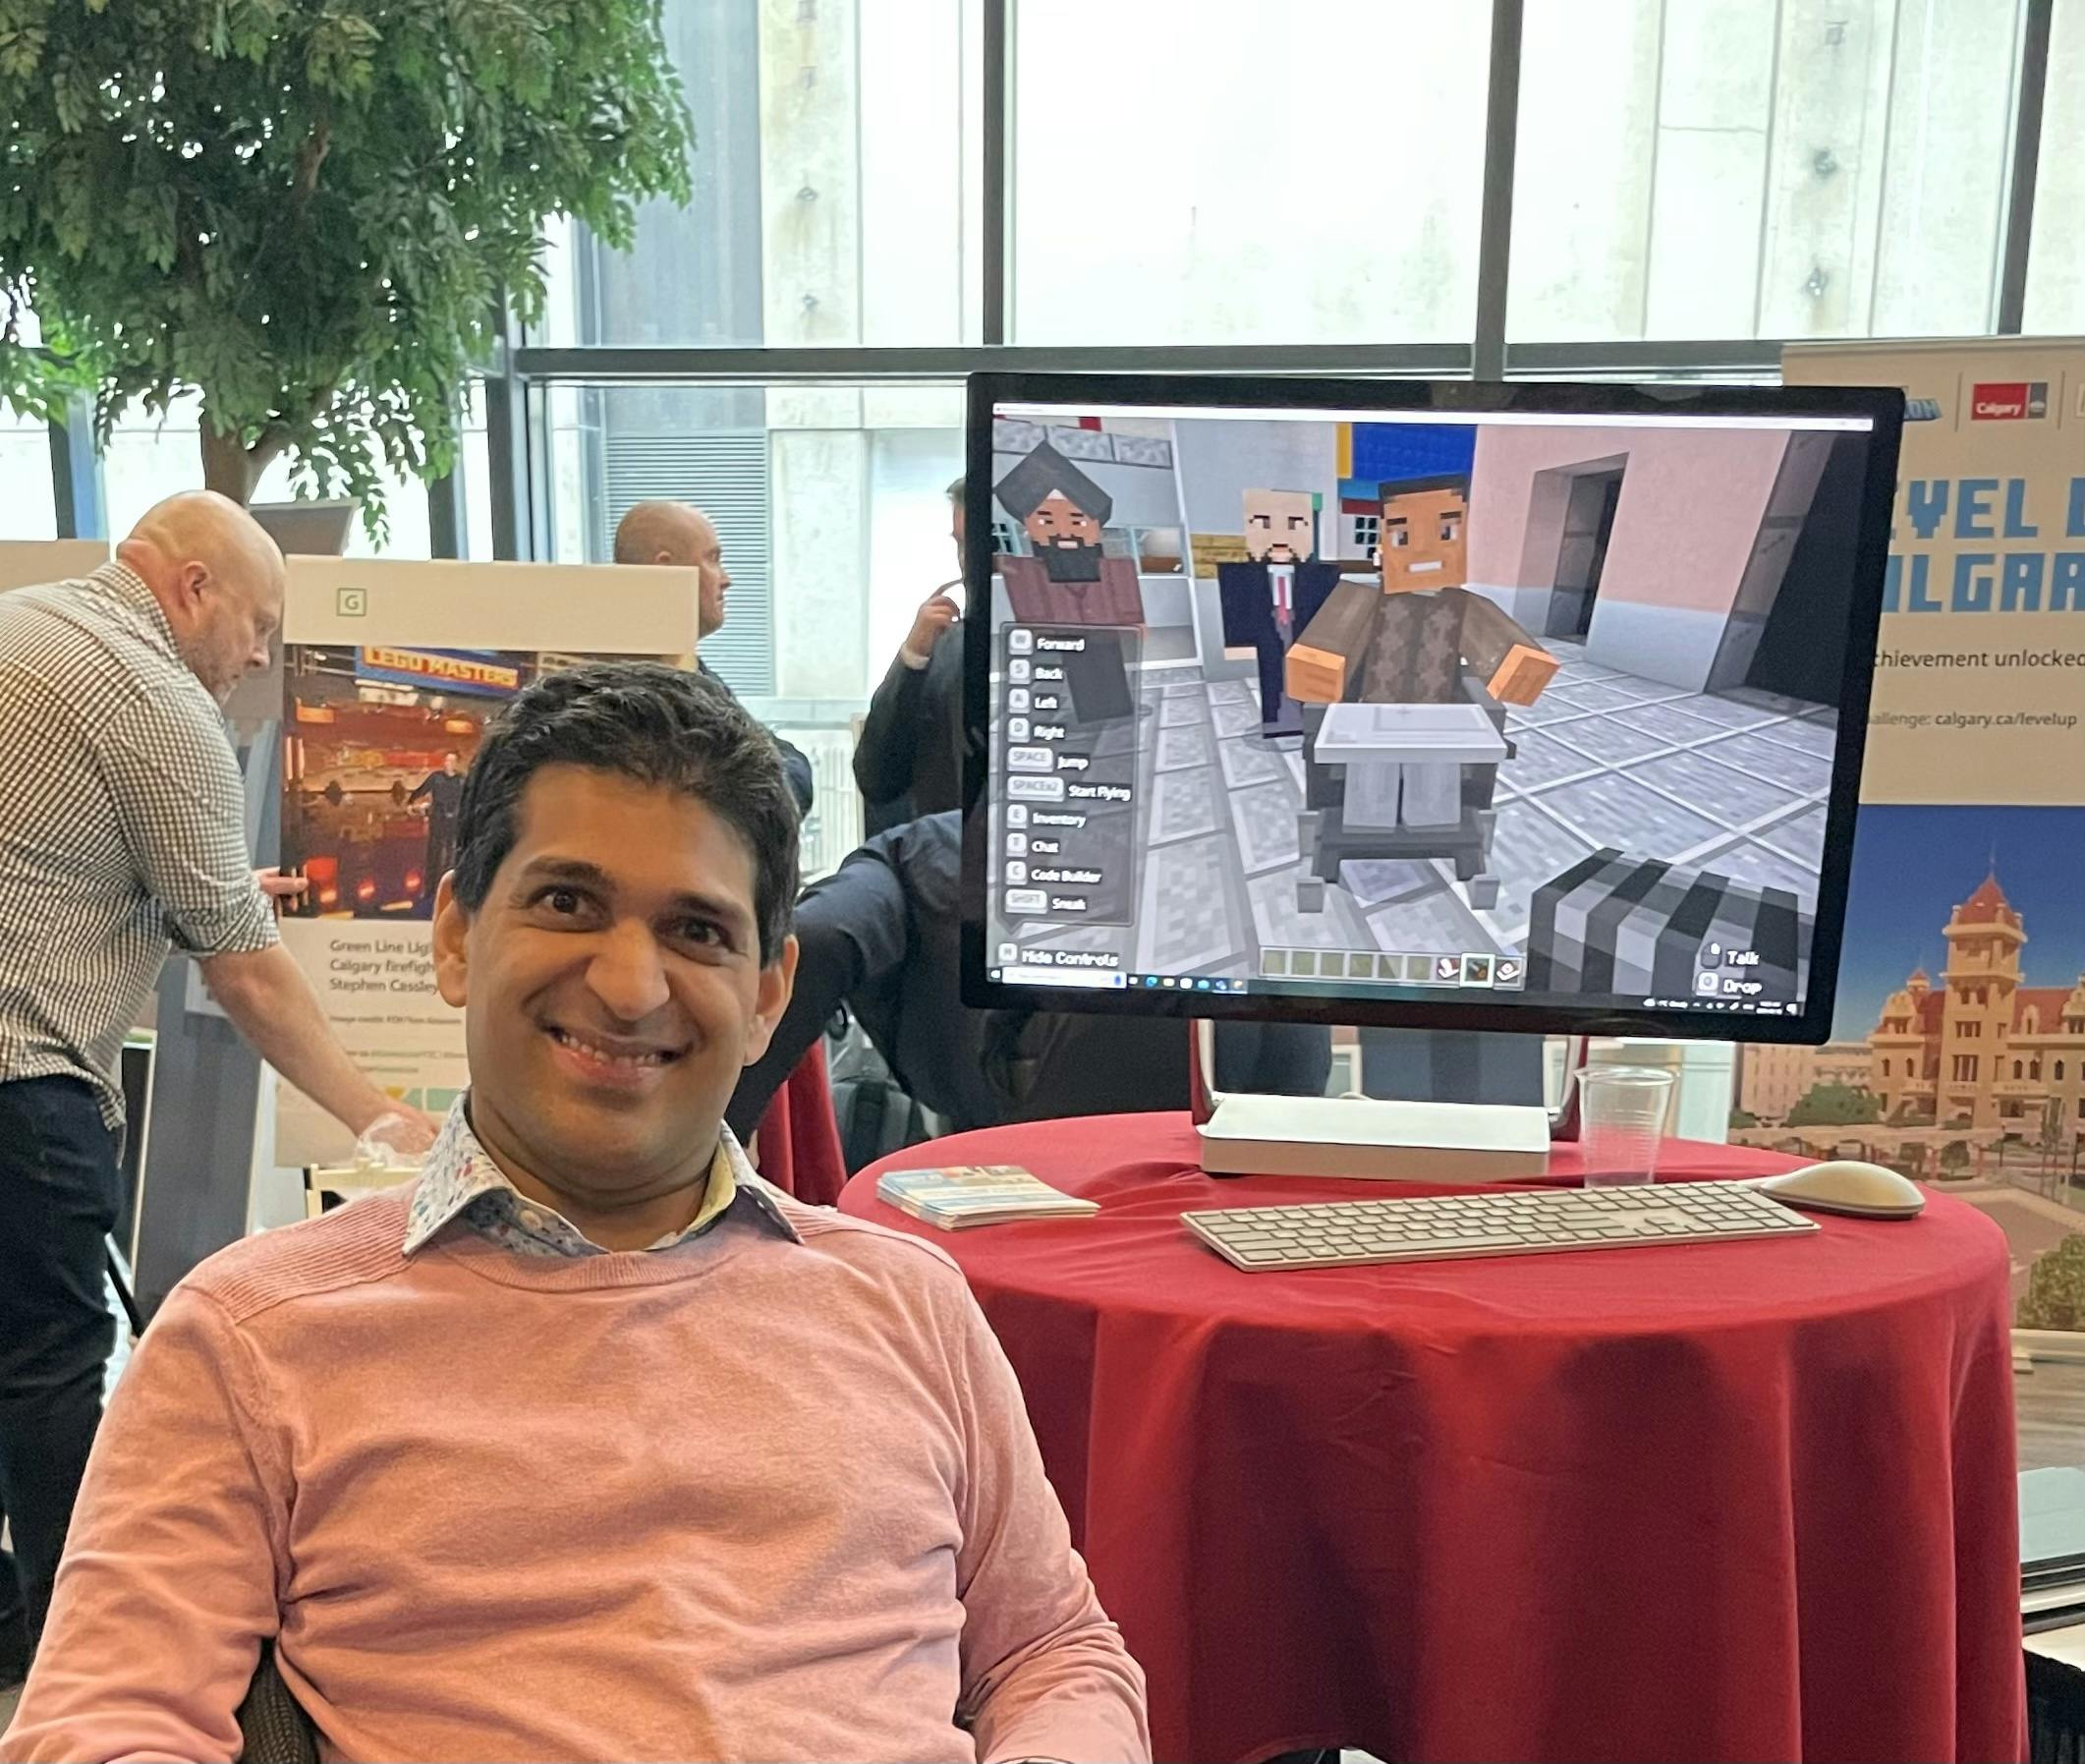 Pedesting Chief Executive Officer, Nabeel Ramji beside his Minecraft character